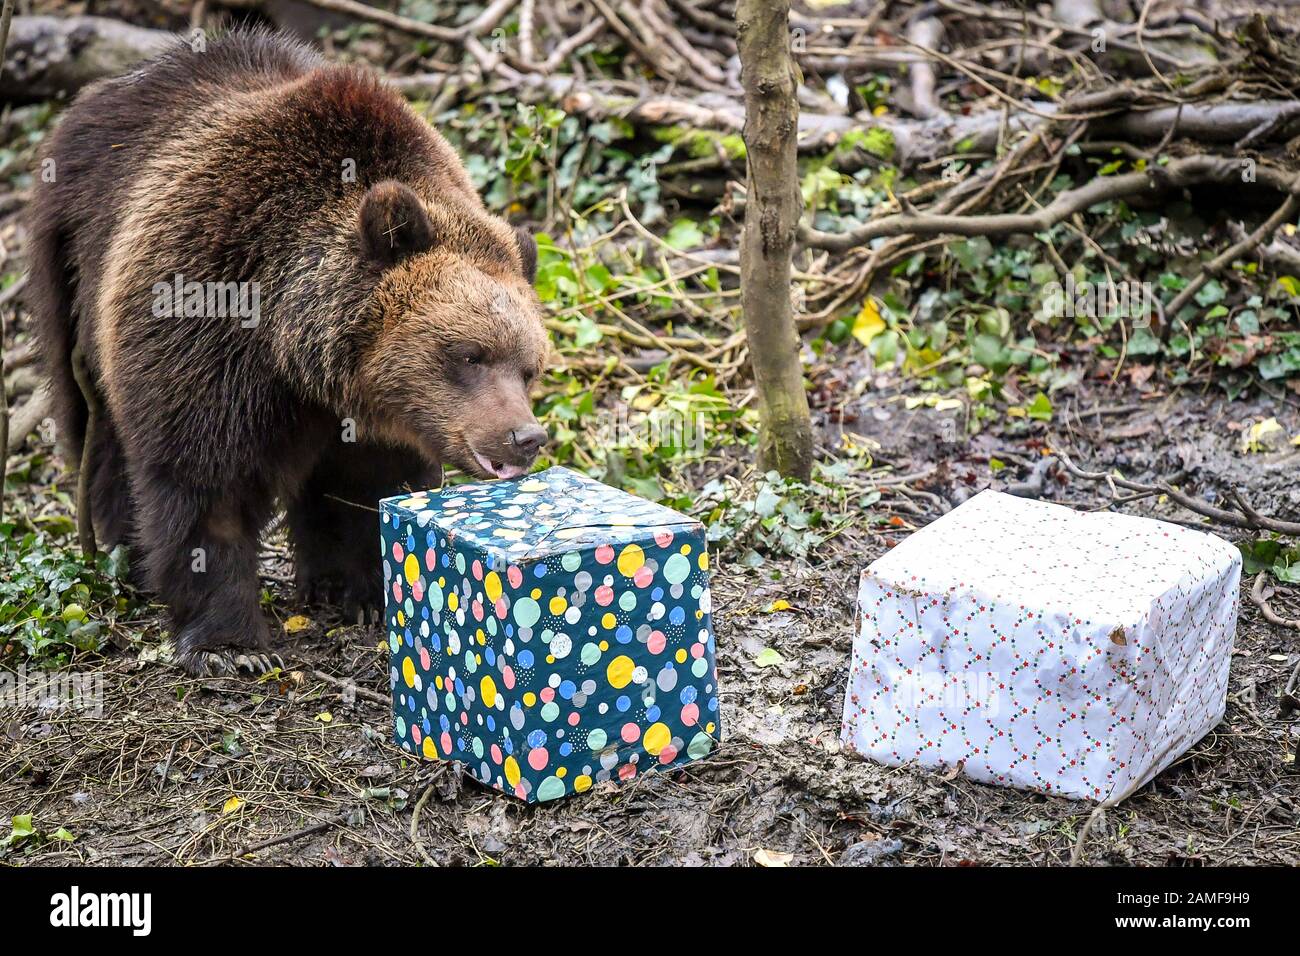 European brown bears celebrate their birthdays and are given gifts and treats at Bristol Zoo's Wild Place Project, South Gloucestershire, where four of the bears in Bear Wood are all celebrating their second and third birthdays within a week of each other. Stock Photo